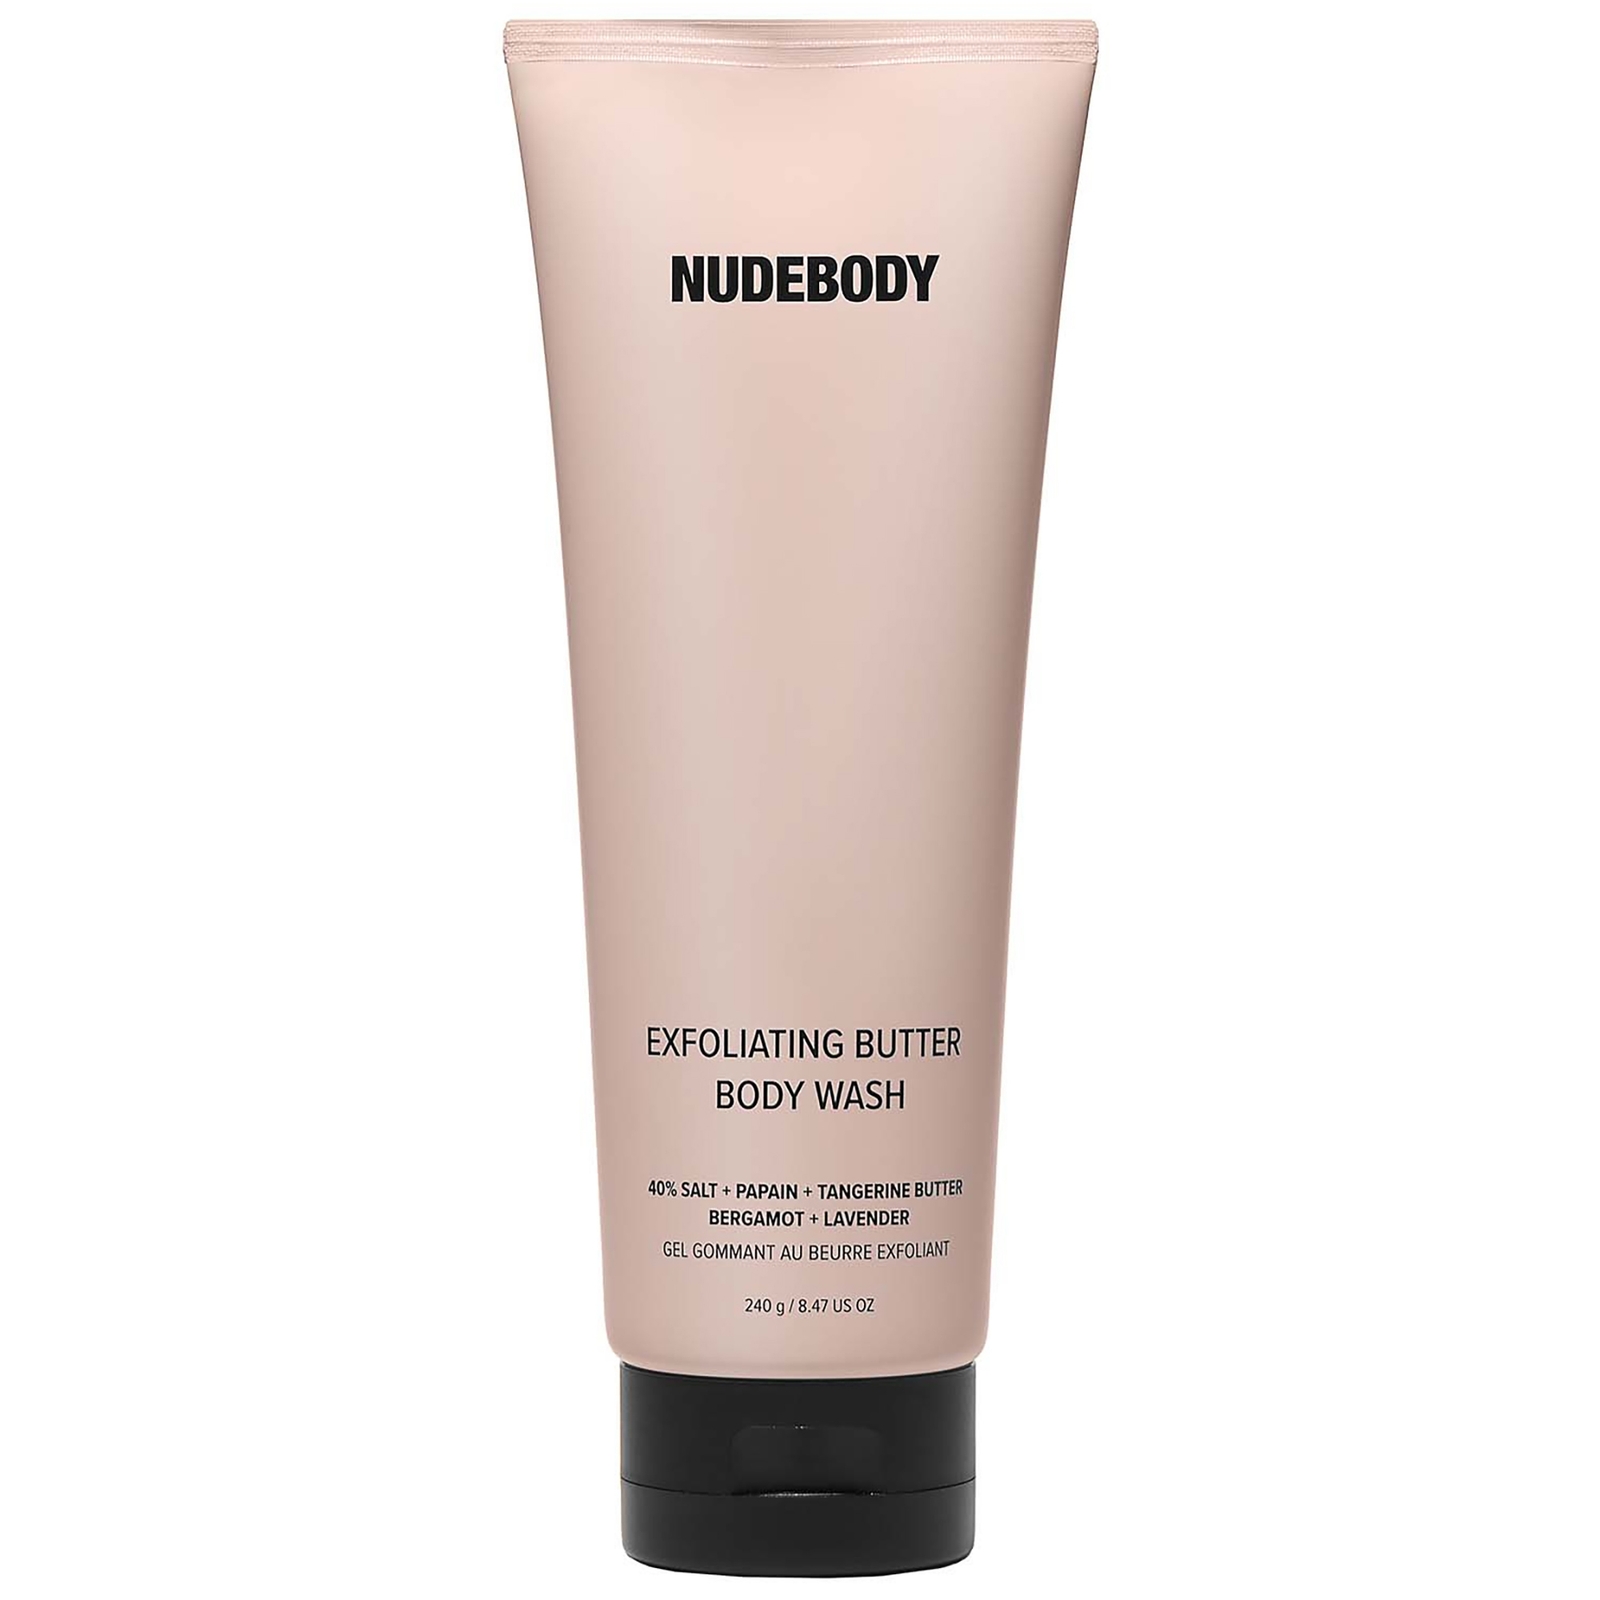 Image of NUDESTIX NudeBody Exfoliating Butter Body Wash 240g Exclusive